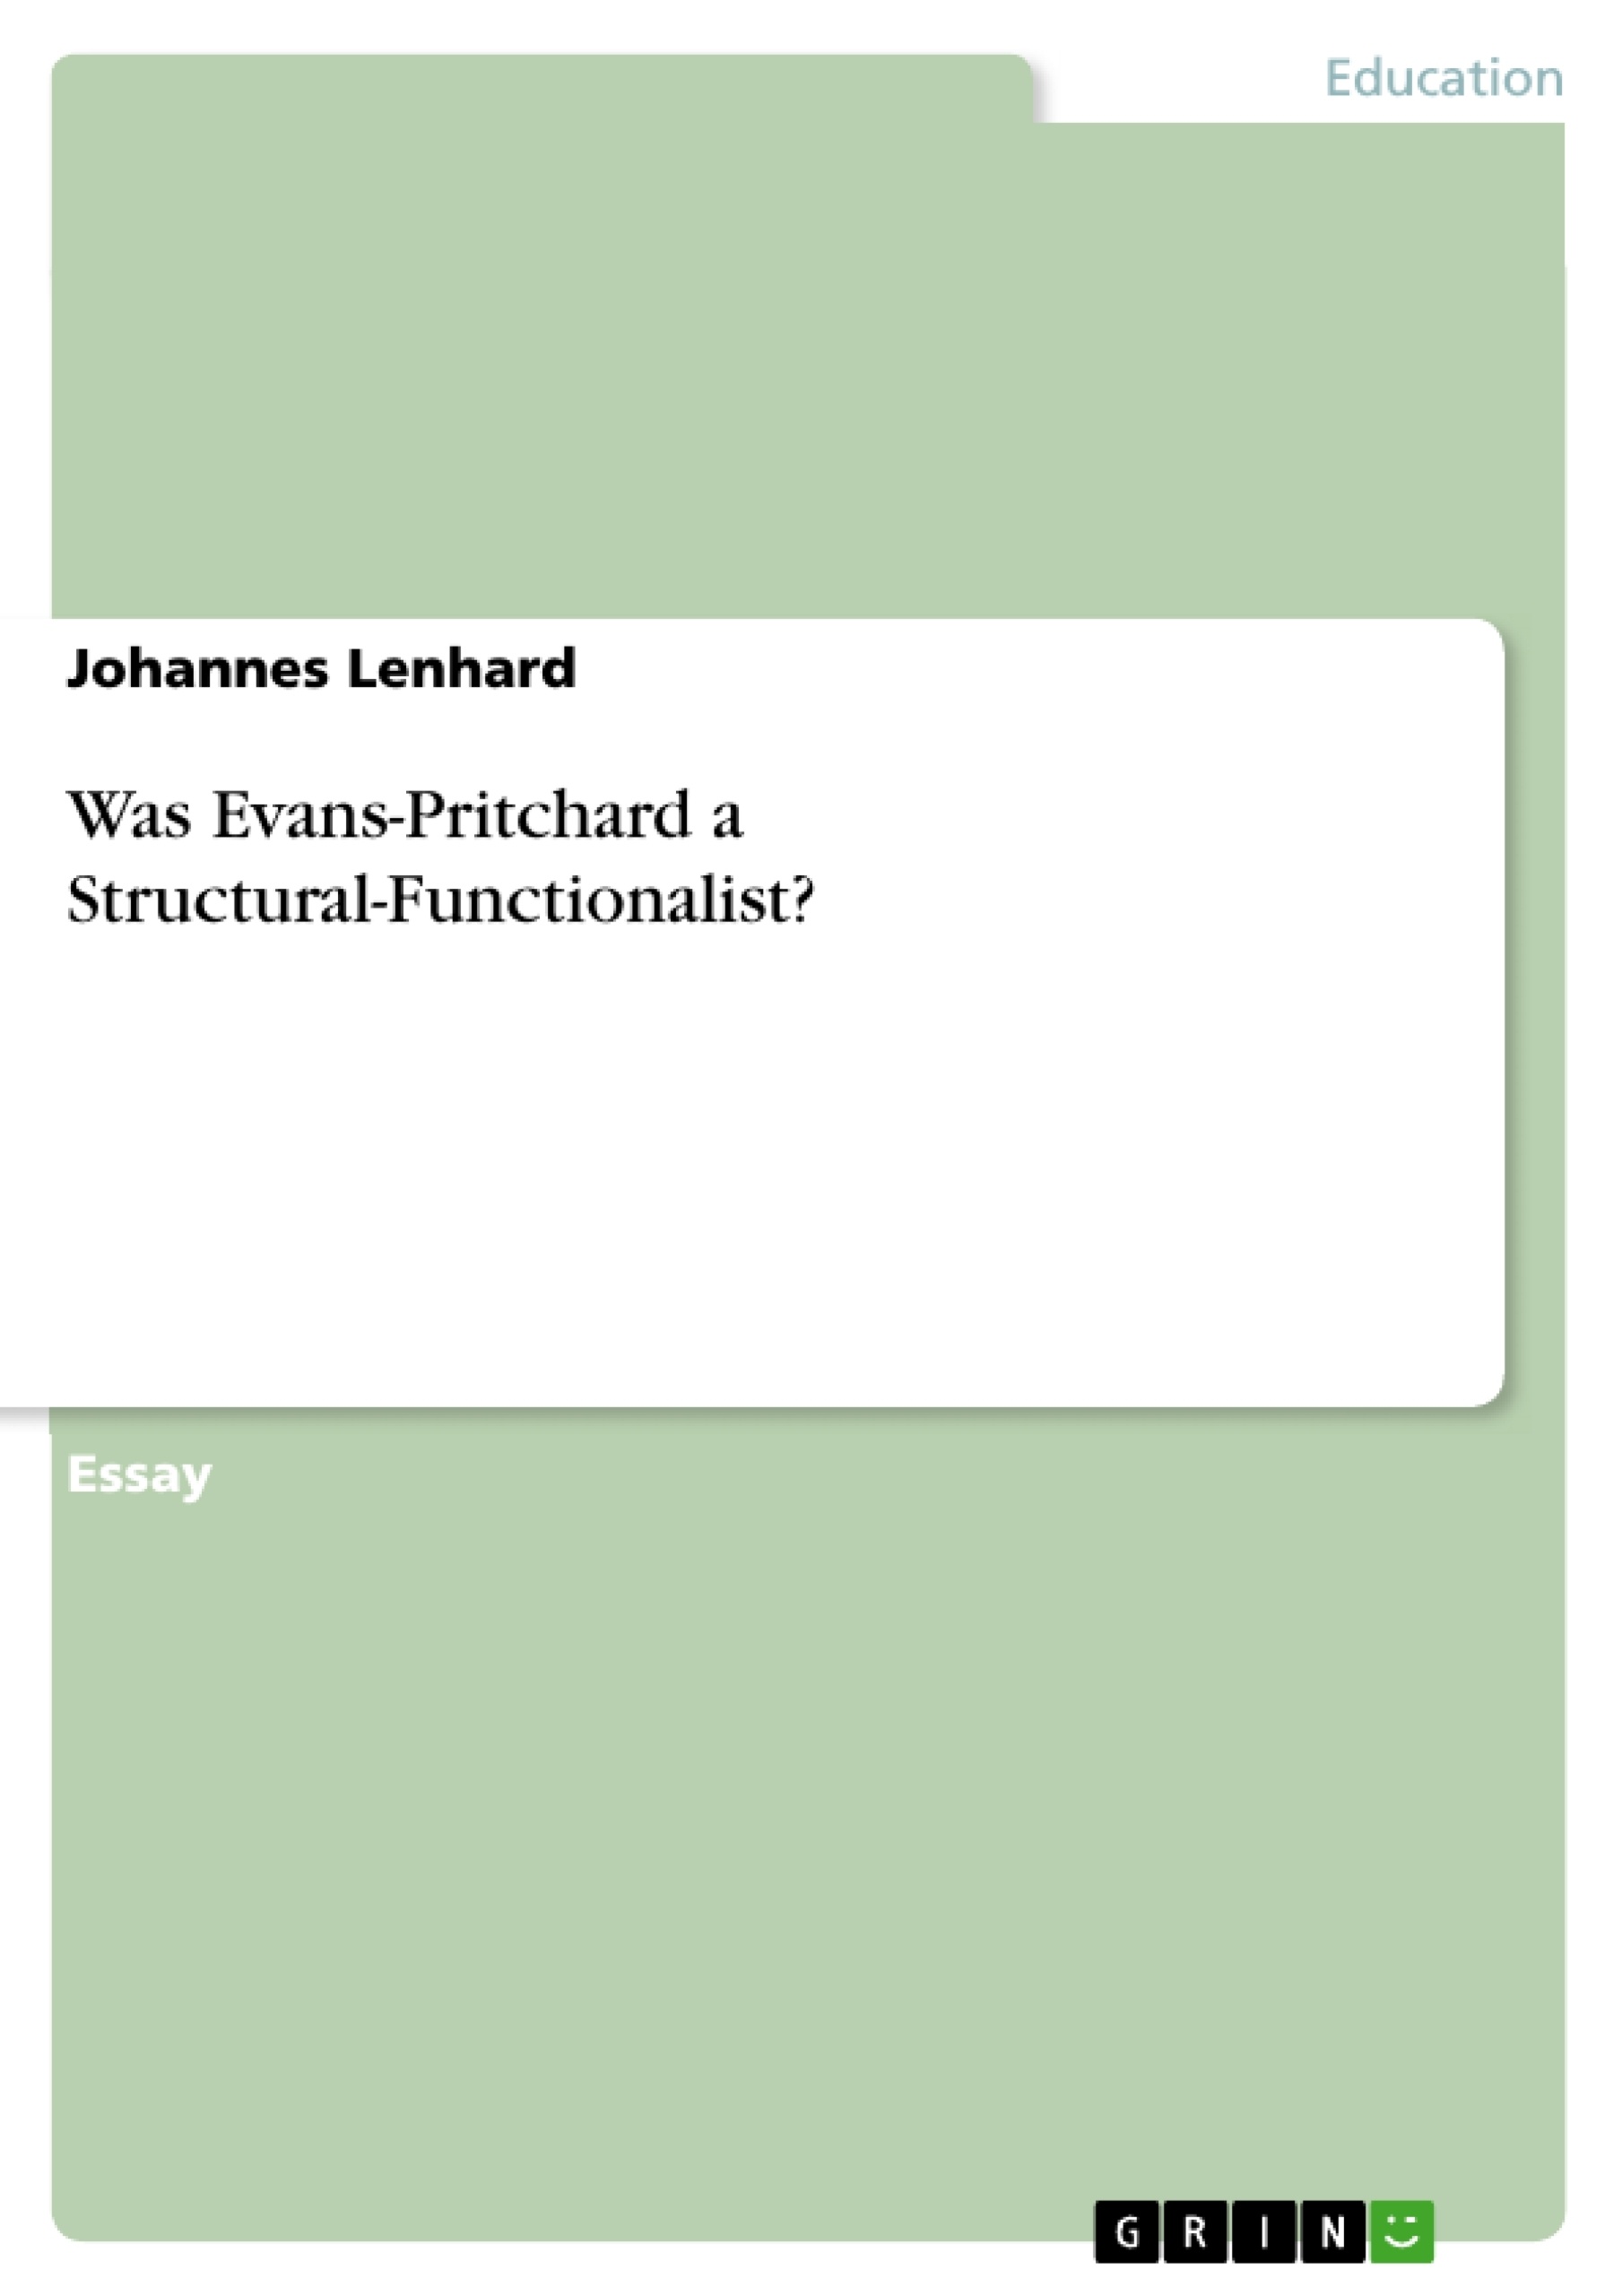 examples of structural functionalism theory